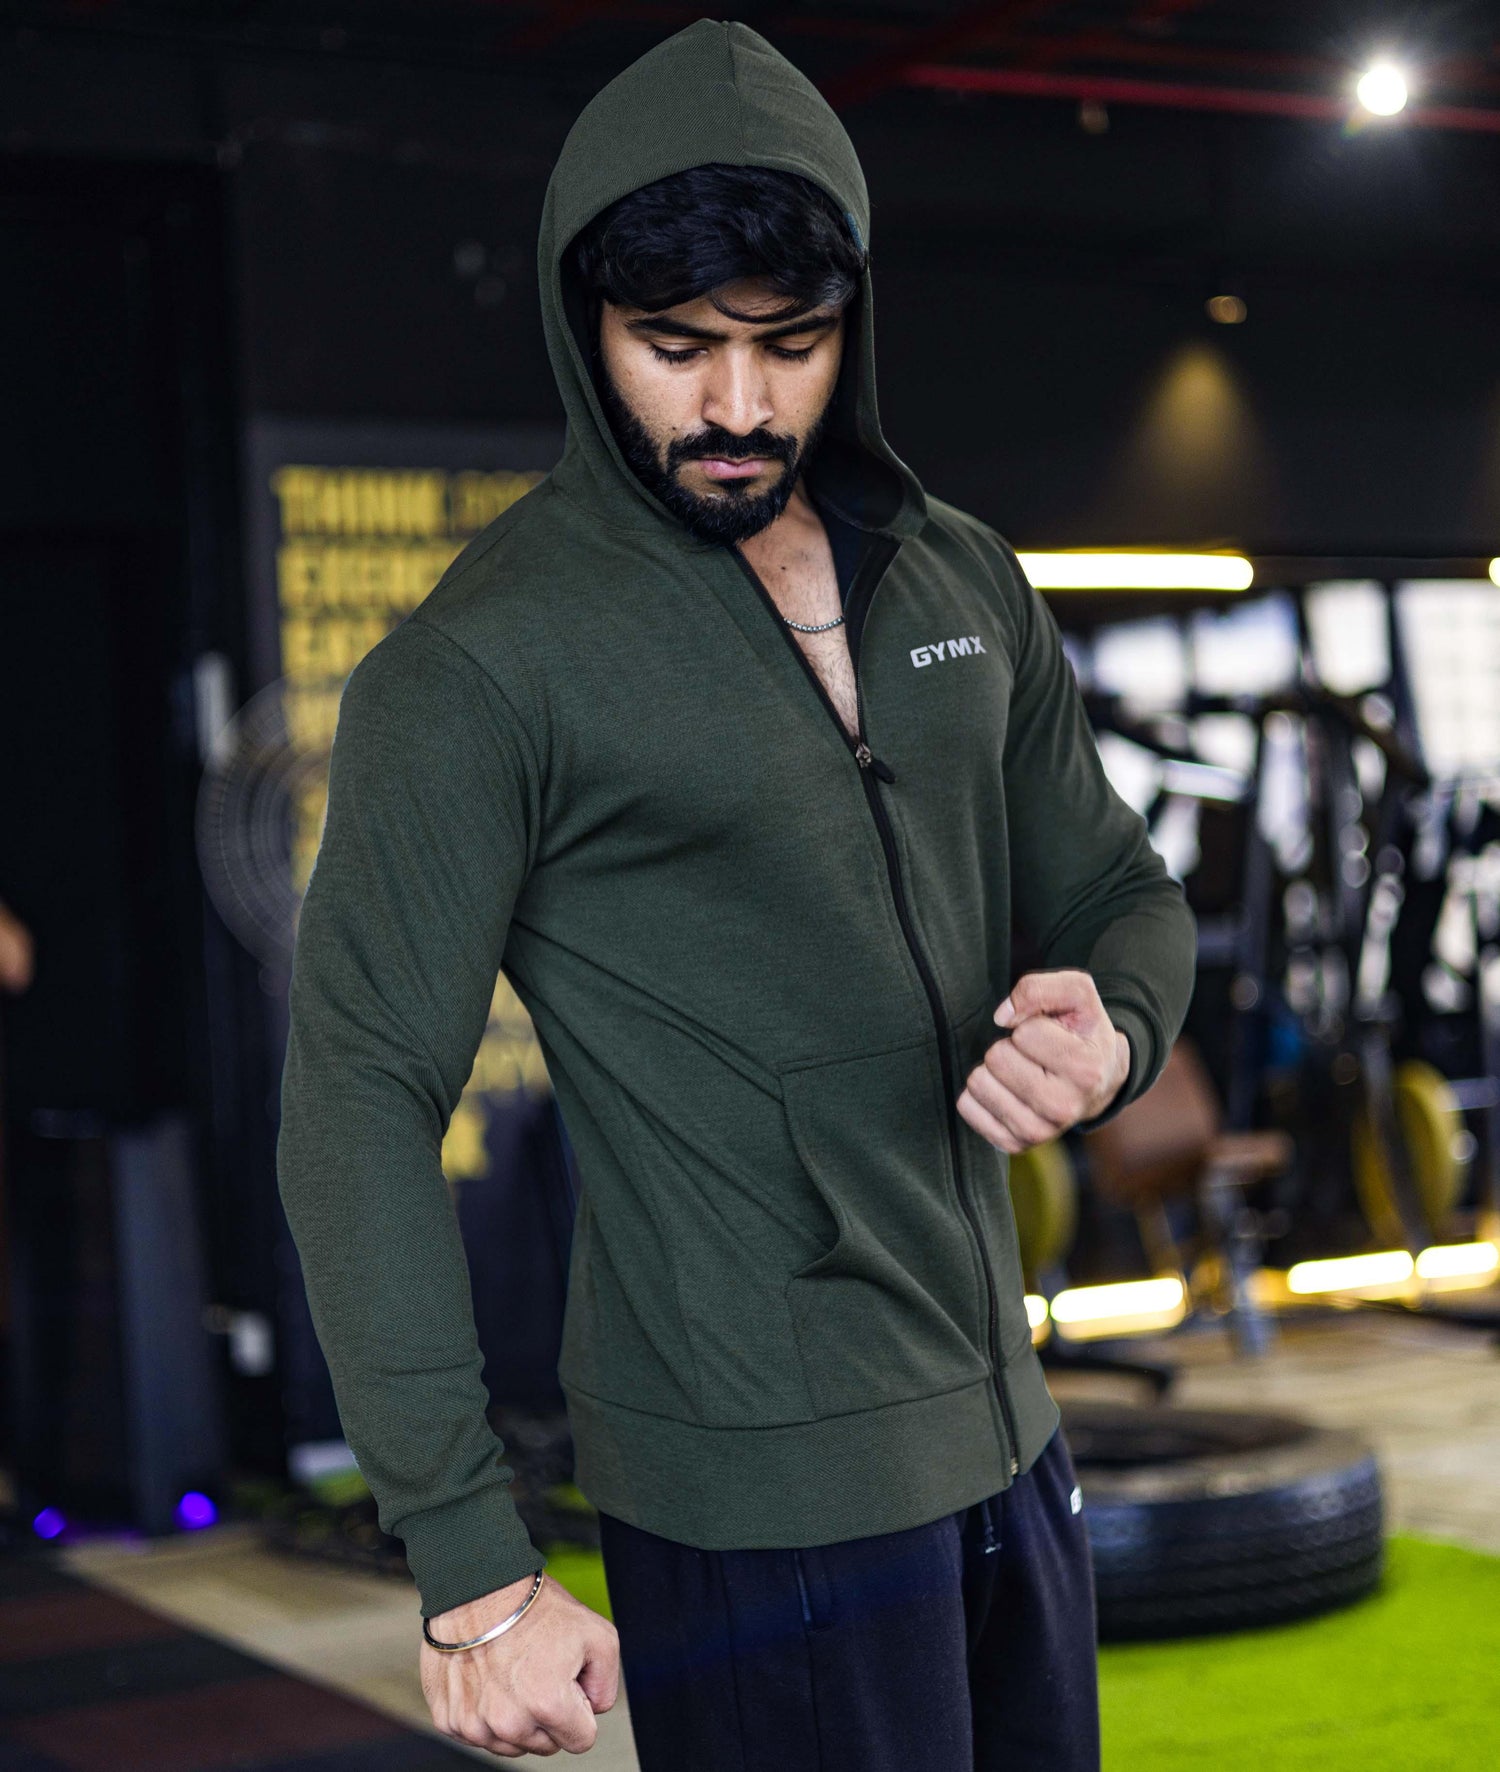 On A Mission: British Green GymX Hoodie - GymX